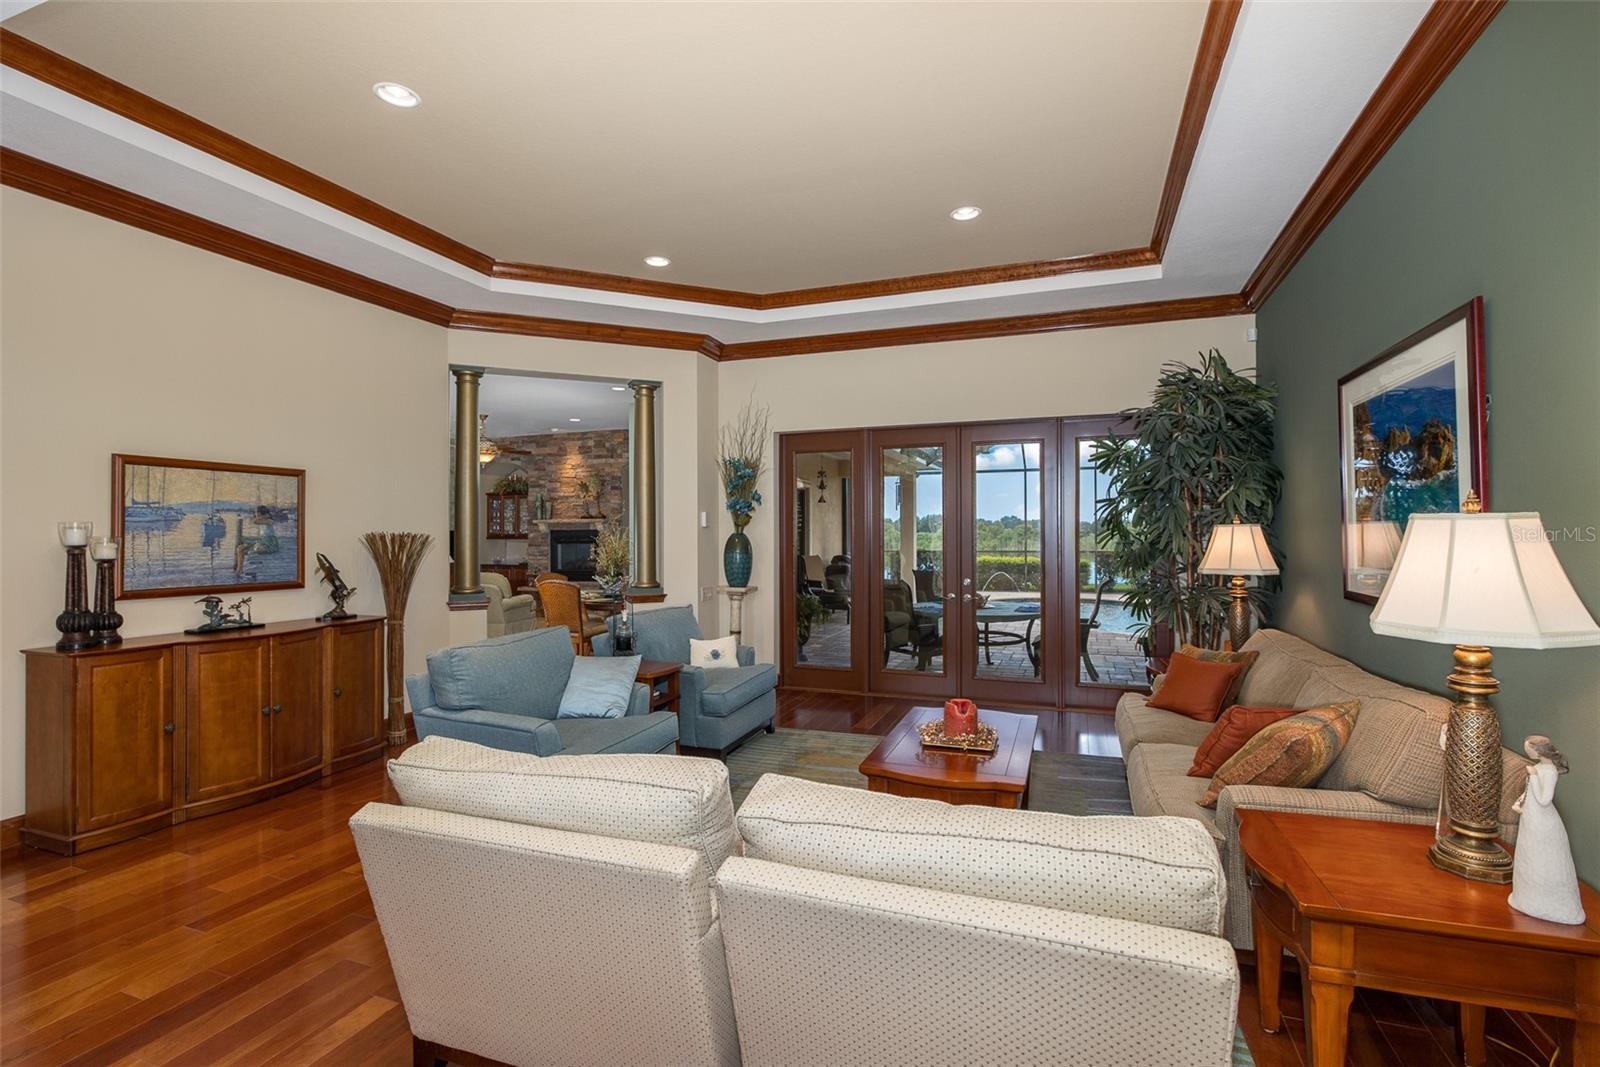 Formal Living room w/Tray Ceiling